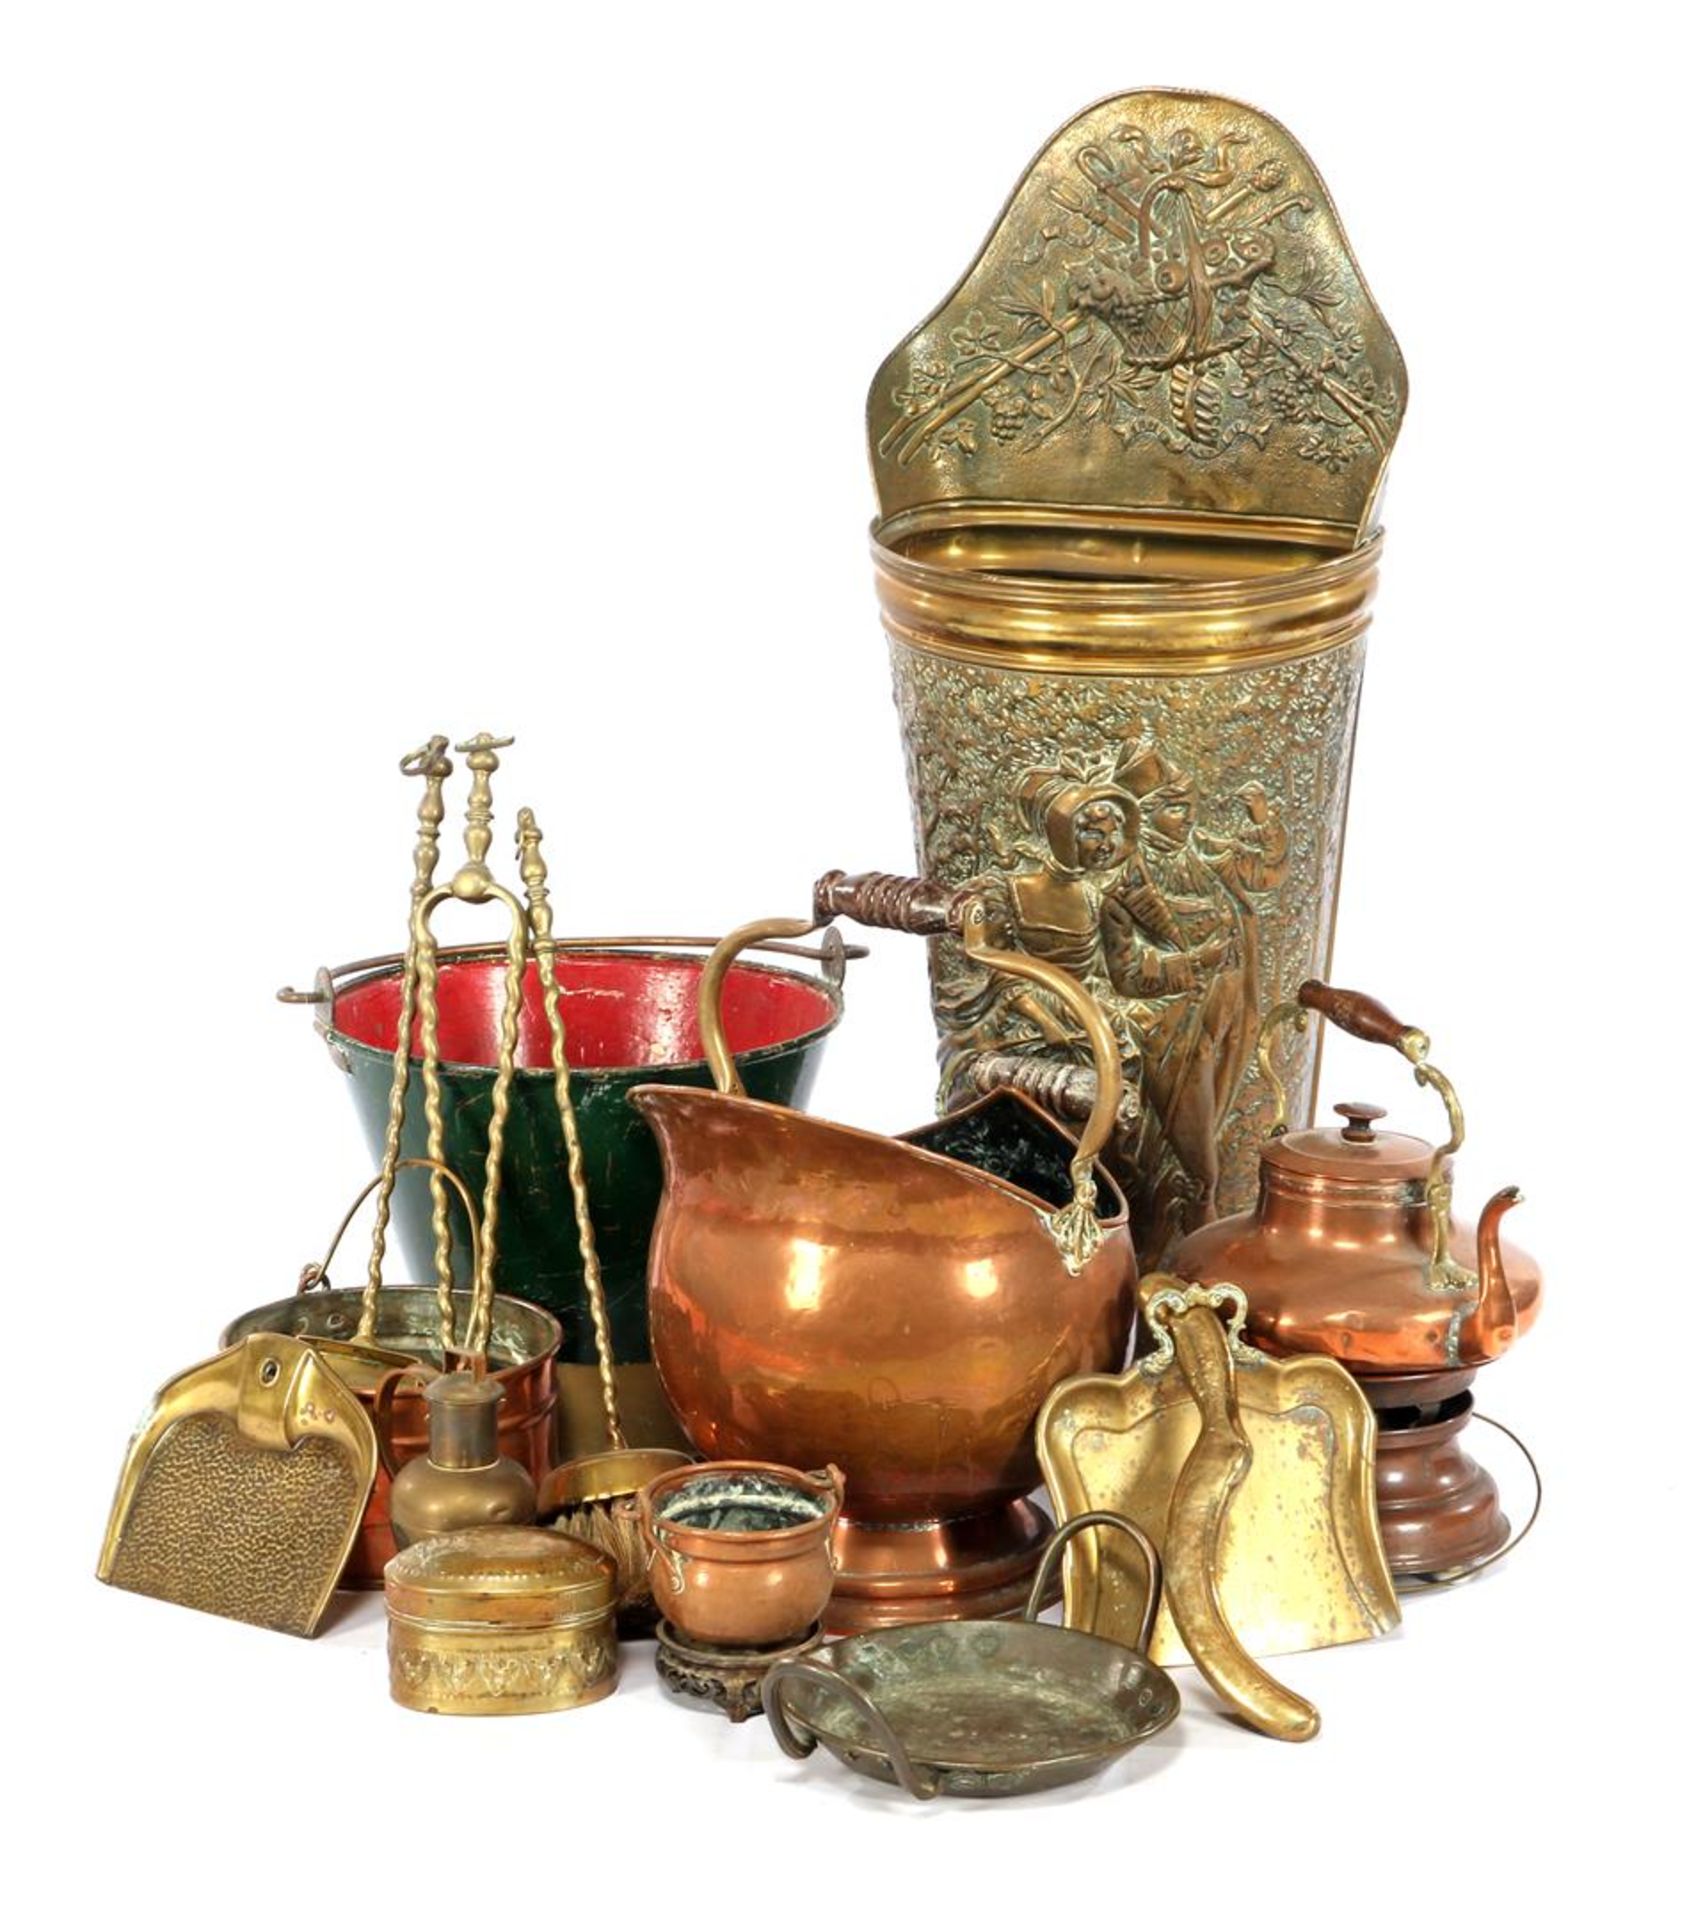 Buy various copperware including umbrella stand and old milk bucket